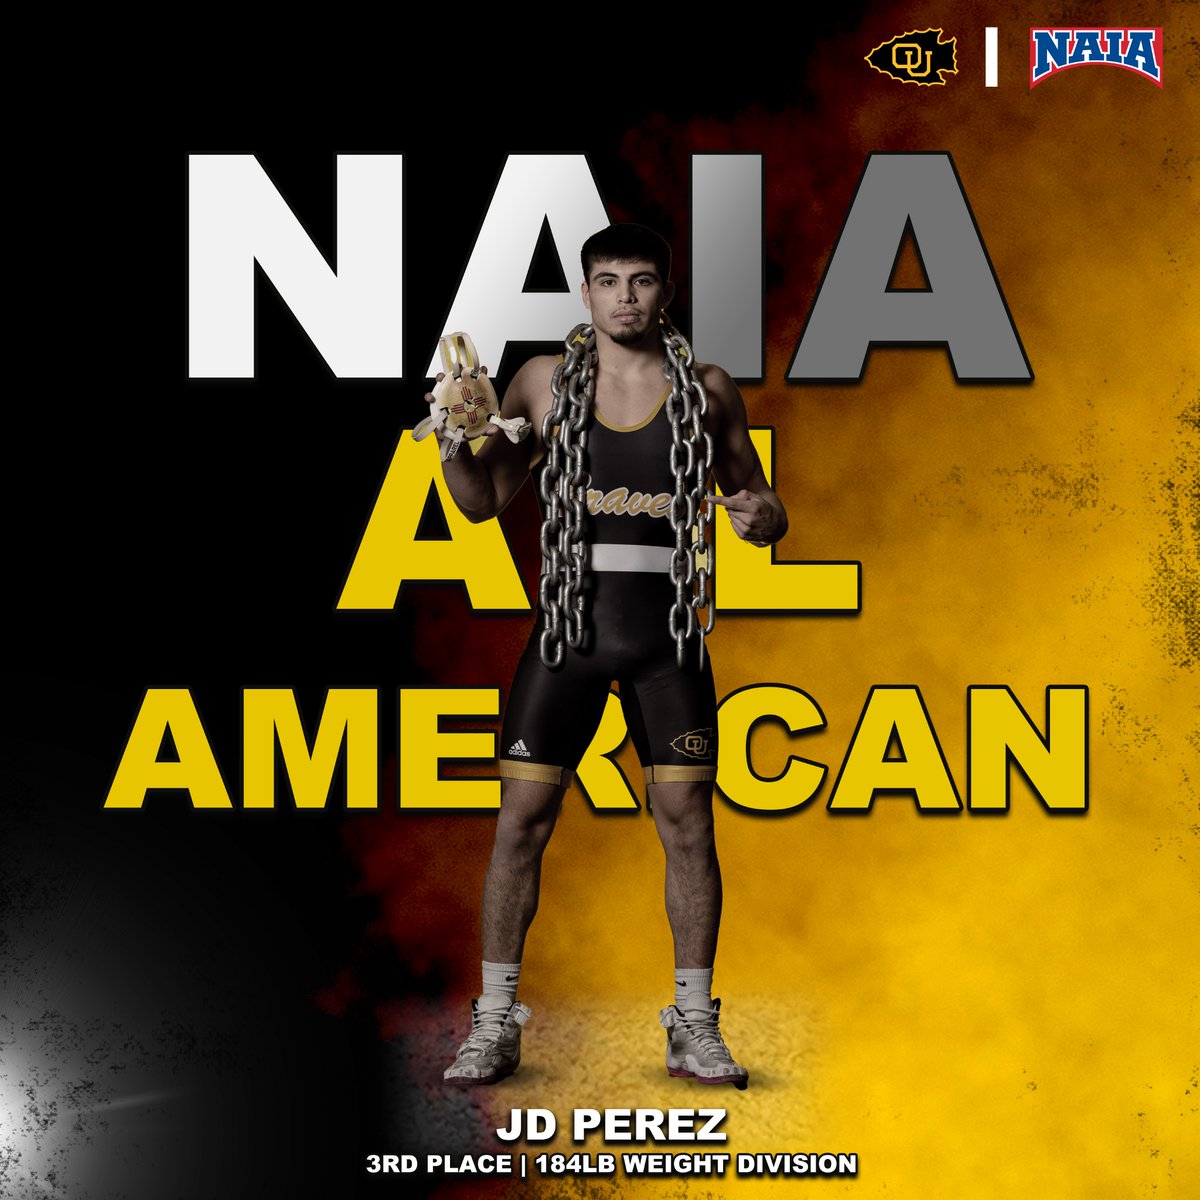 A Third Place Finish in the 184lb weight division and an NAIA All-American: JD Perez @OuBravesMwr_Wwr x #BraveNation